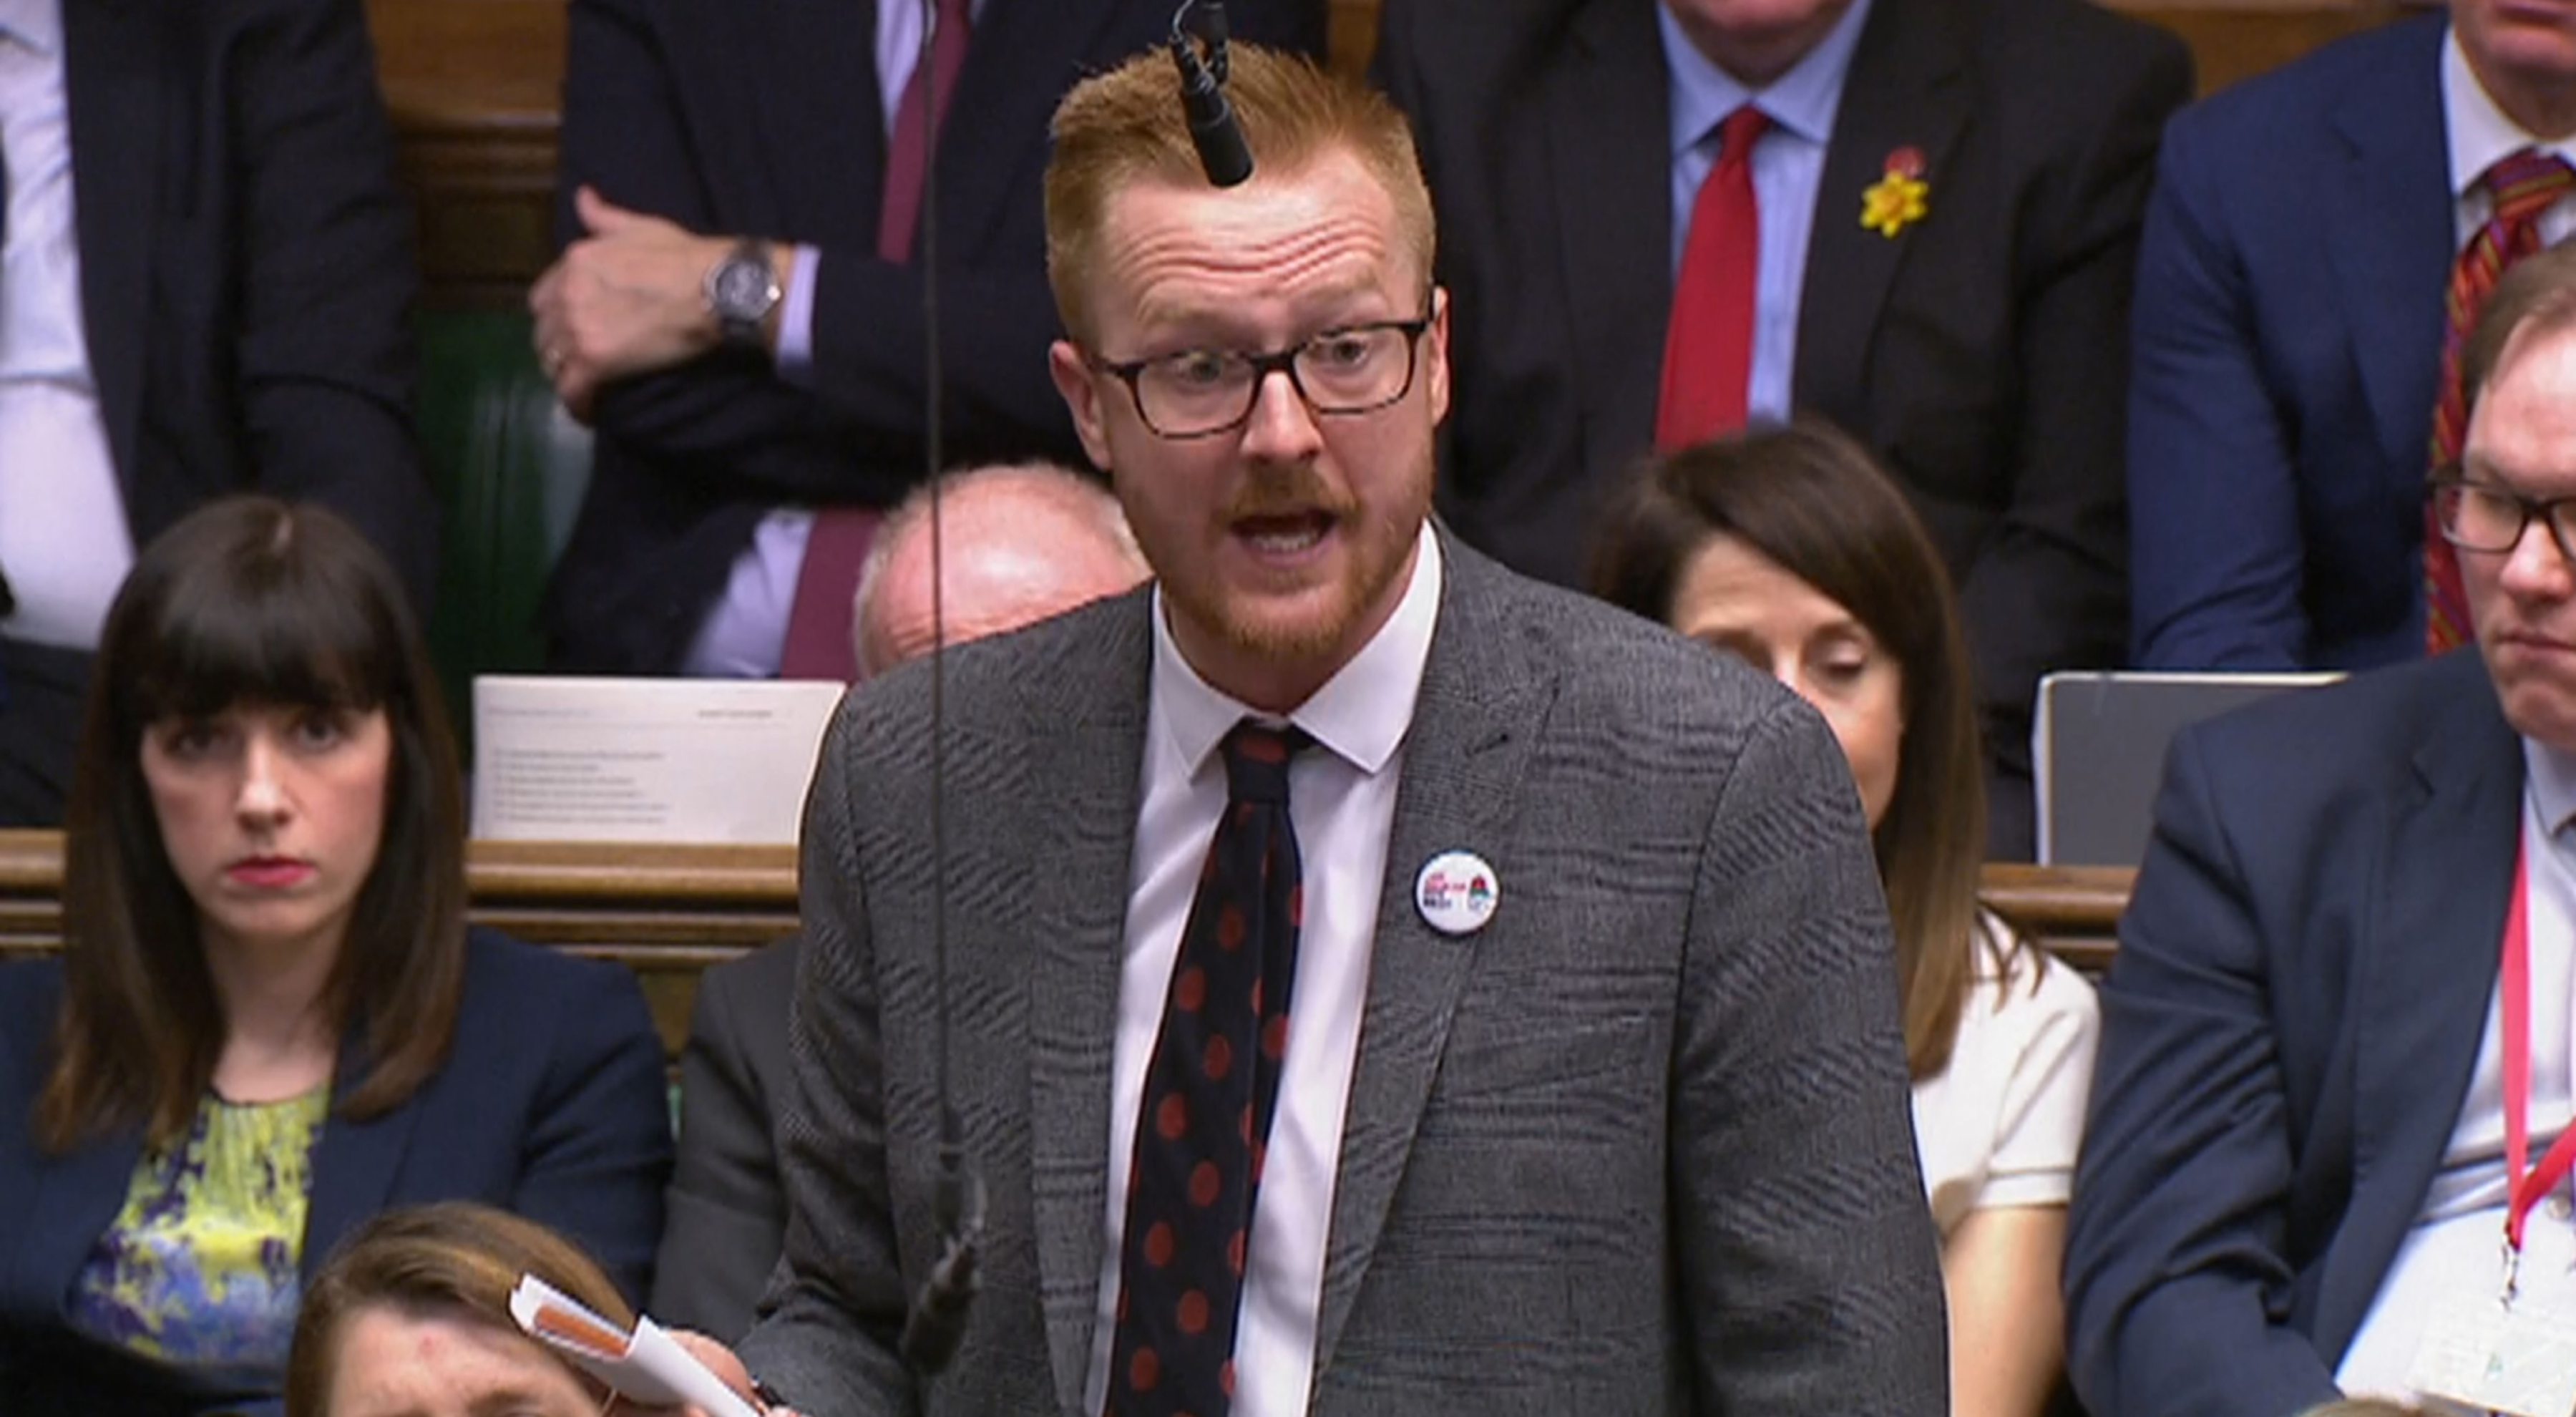 Labour MP Lloyd Russell-Moyle asks the prime minister to condemn comments made this morning by Commons leader Andrea Leadsom on the teaching of LGBT relationships.
Speaking on LBC radio, Ms Leadsom said, with regards to LGBT relationships, that parents should get to decide when their children "become exposed to that information".
Mr Russell-Moyle says these views are "dog-whistle politics", and calls on the PM to condemn "bigots that do not want LGBT people to be heard in schools".
Theresa May says shell write to him about the official guidance Ofsted provides for teaching about LGBT relationships.
Picture: HOC/Universal News And Sport (Europe) 20/03/2019